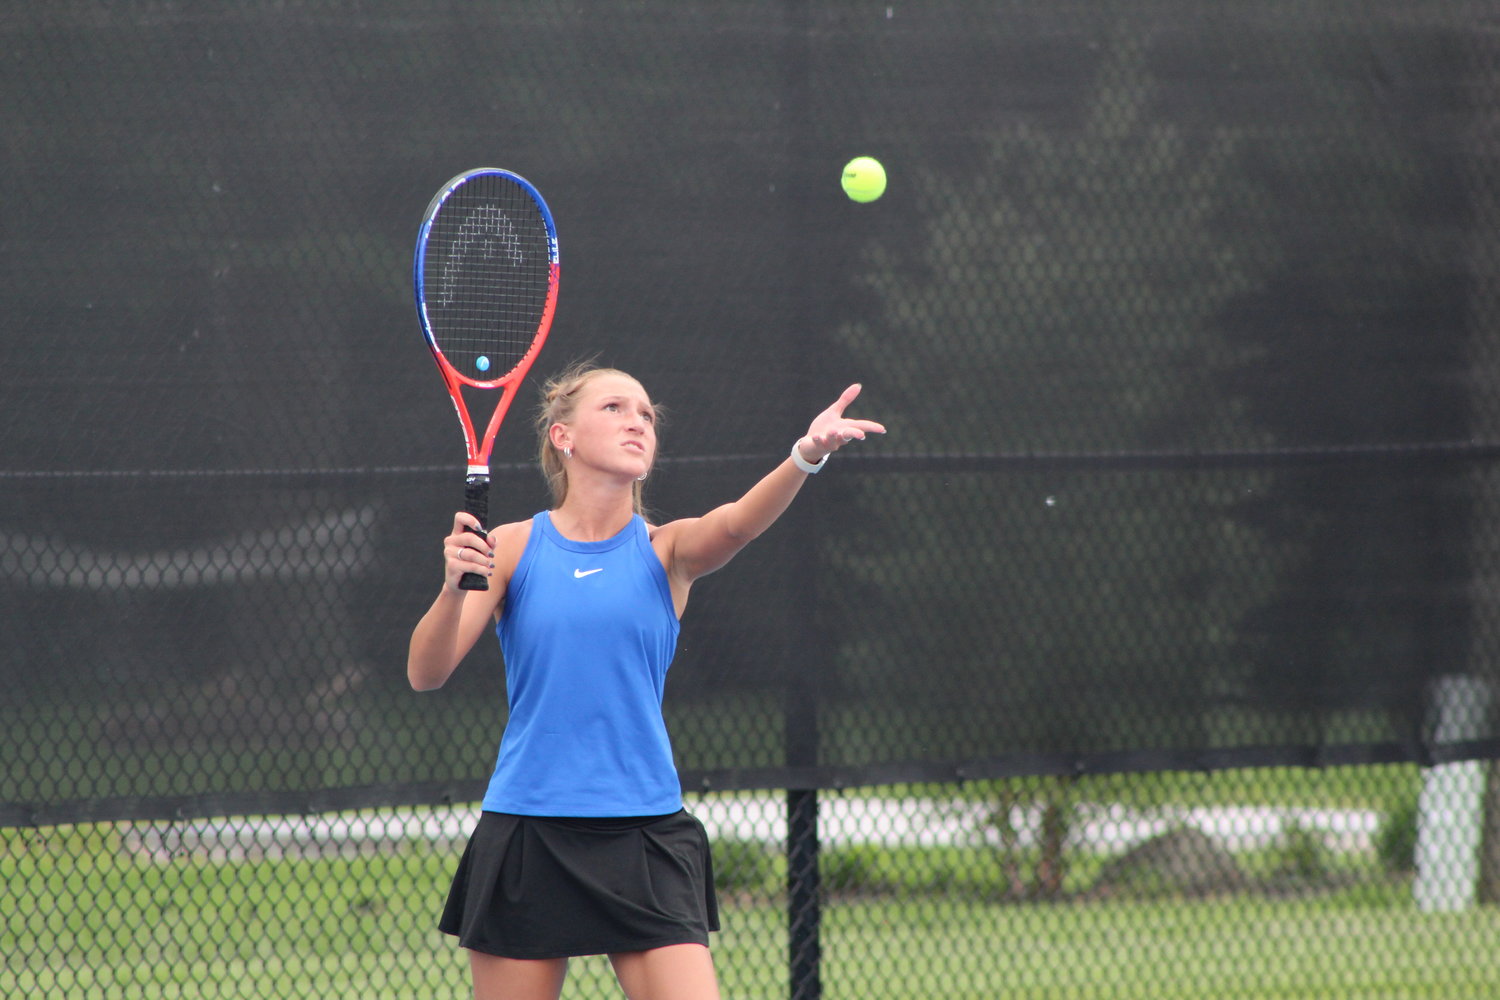 Elyse Widmer has been a steady player at No. 2 doubles alongside teammate Mia Wagner for CHS.